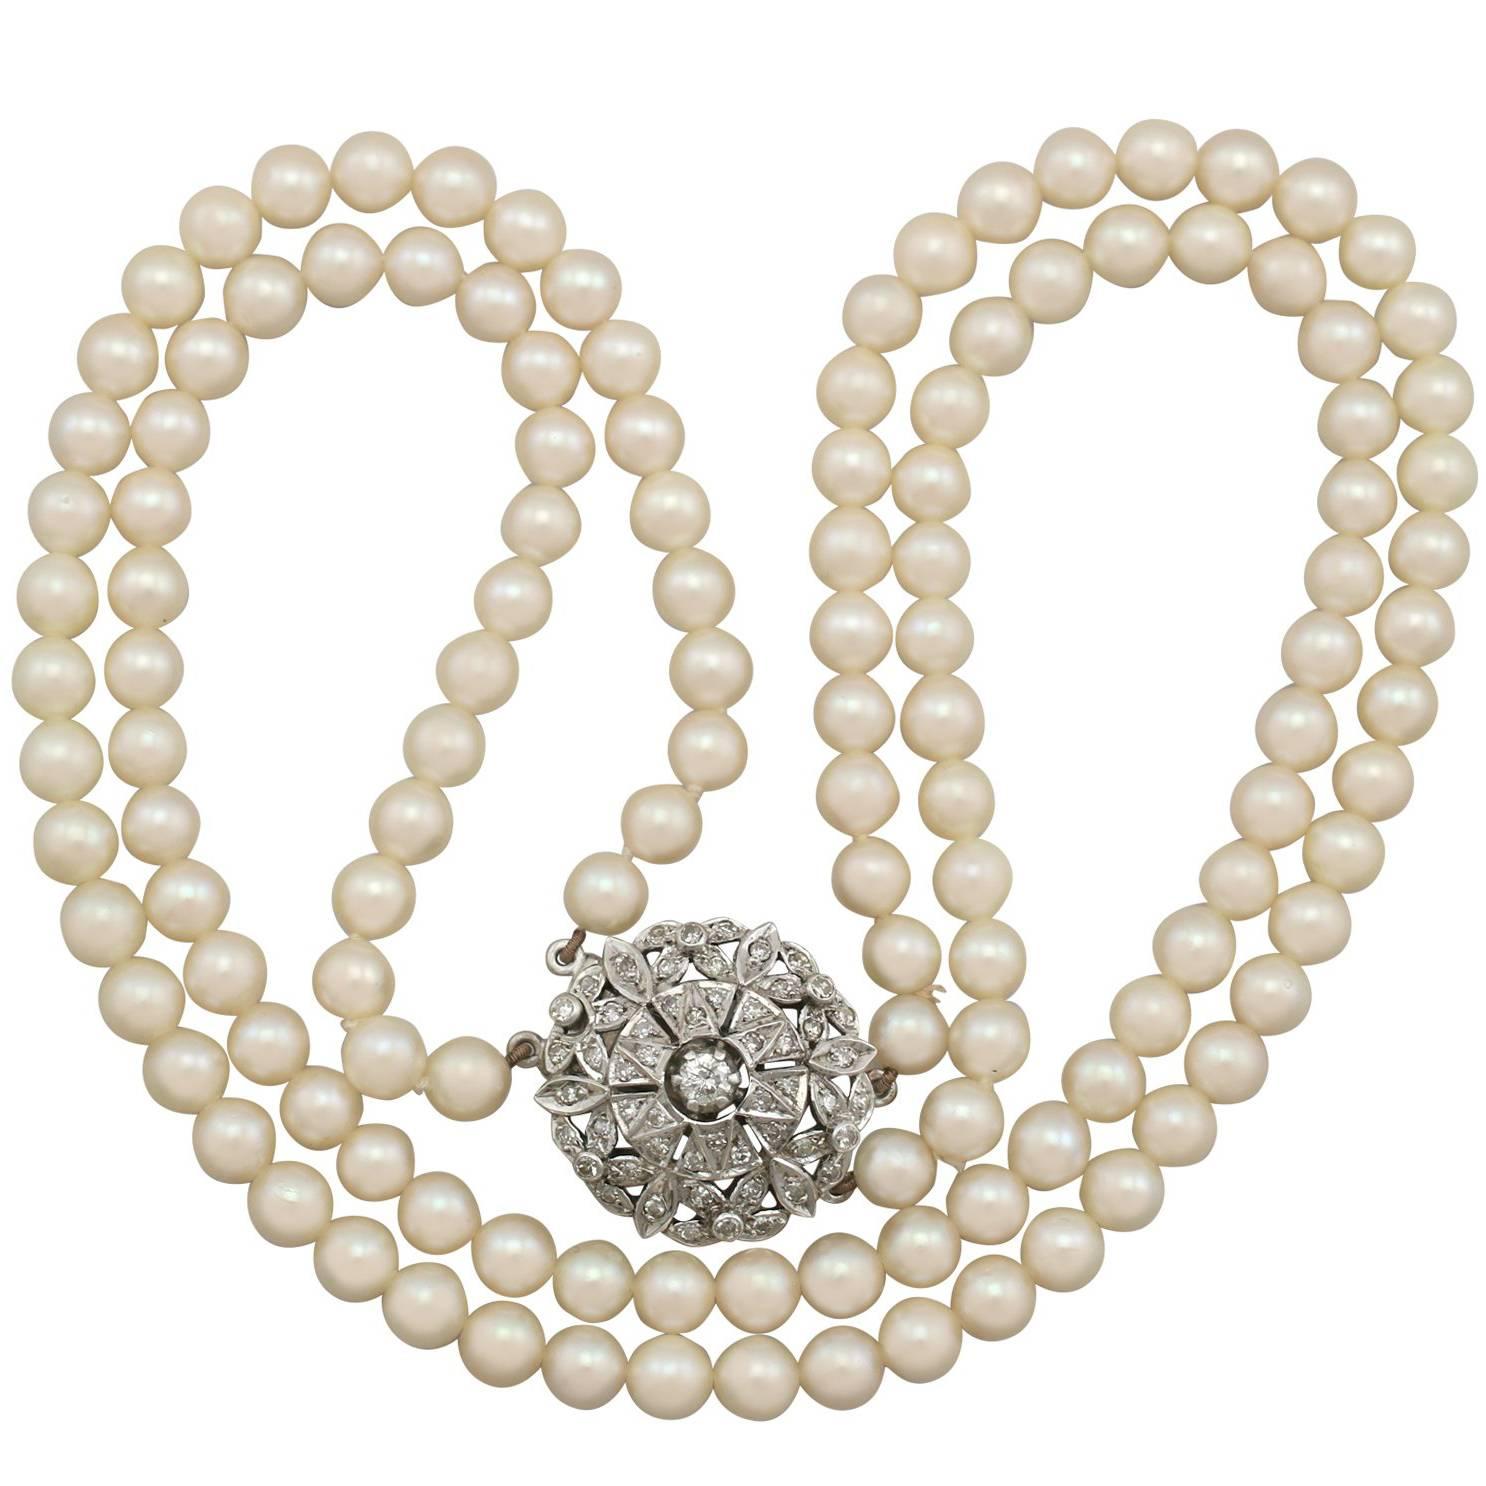 1970s Double Strand Pearl Necklace with 1.05 Carat Diamond White Gold Clasp